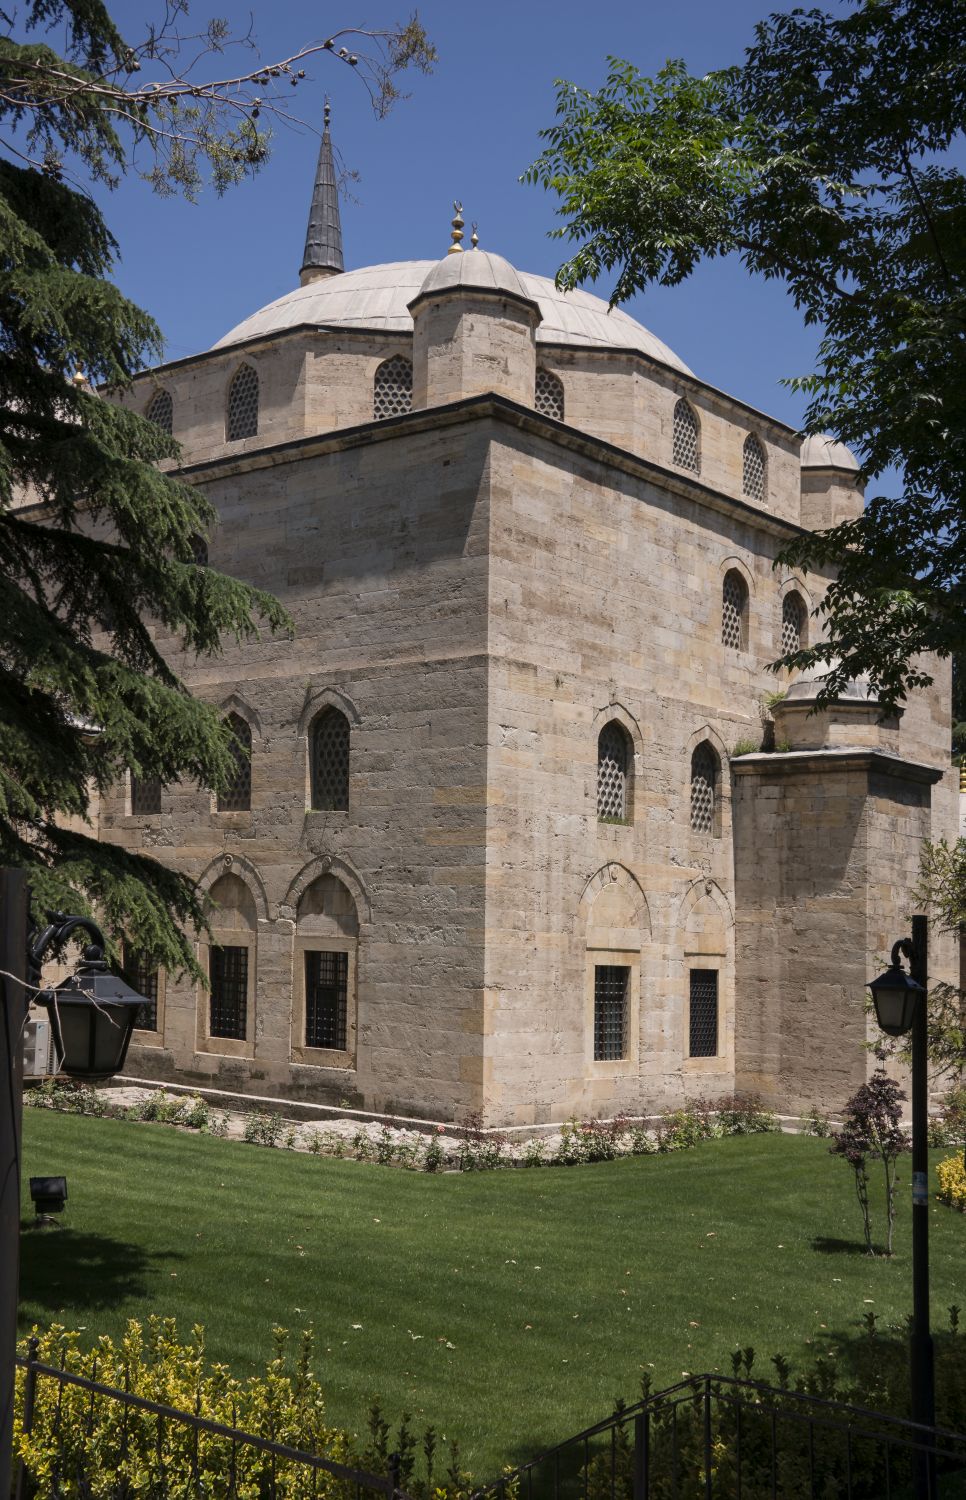 Exterior view of mosque from southeast.